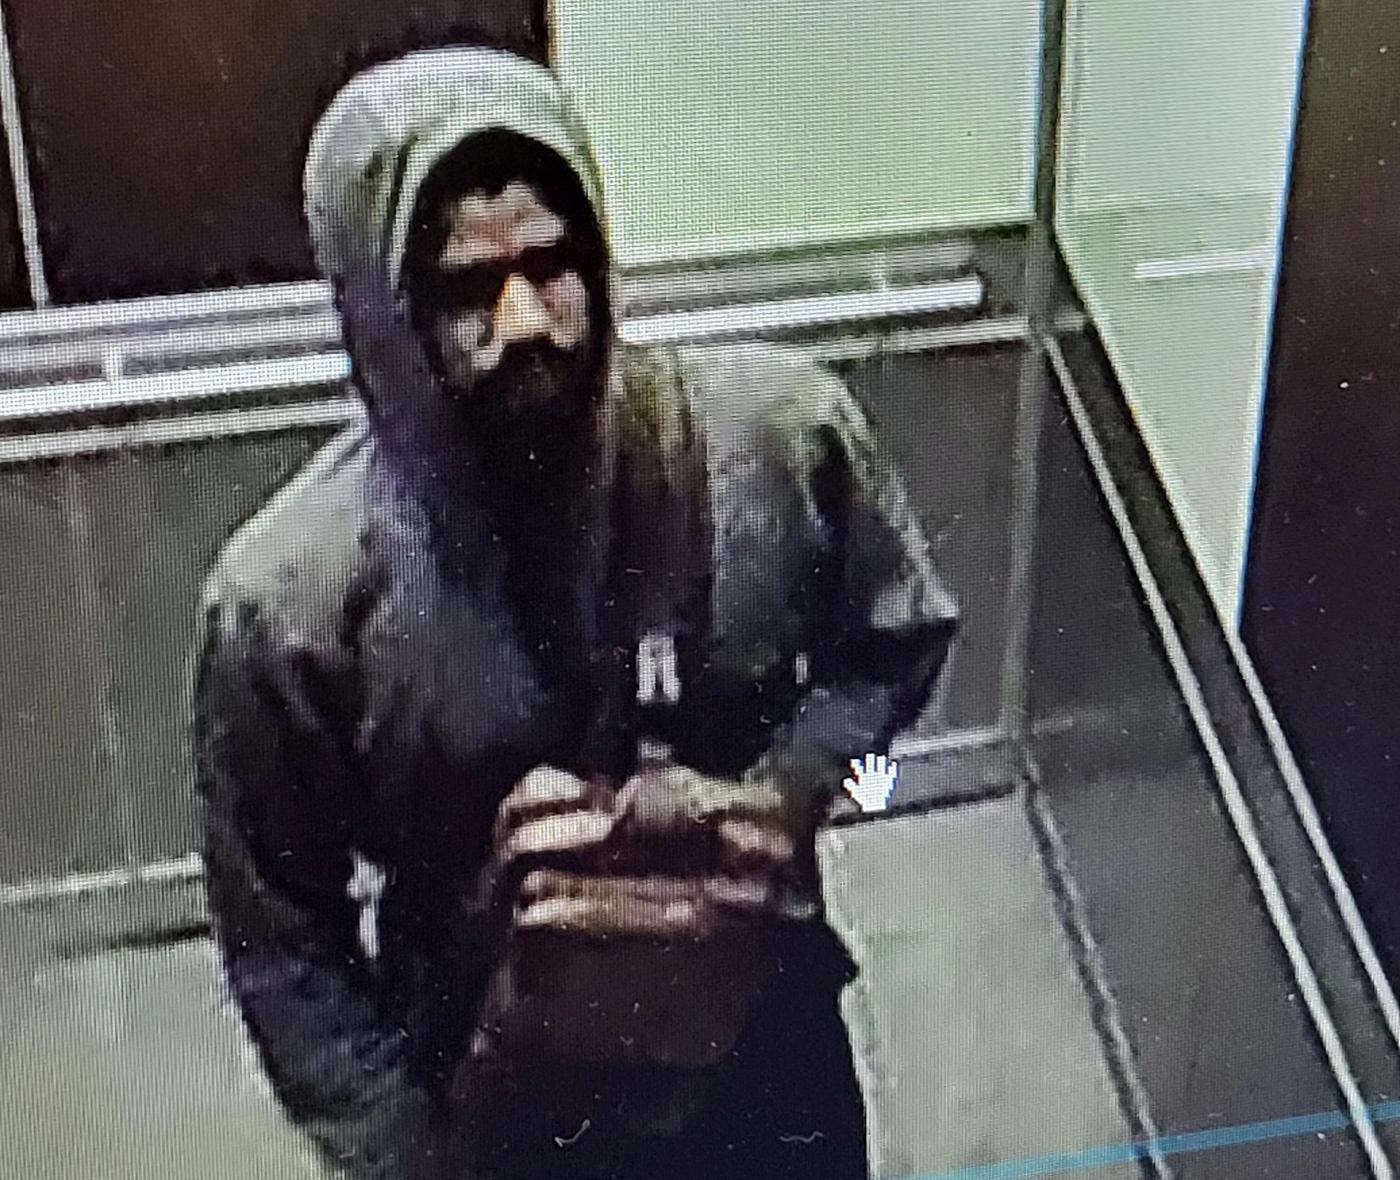 Atlanta said to be on the lookout for this person, who was seen inside the building.